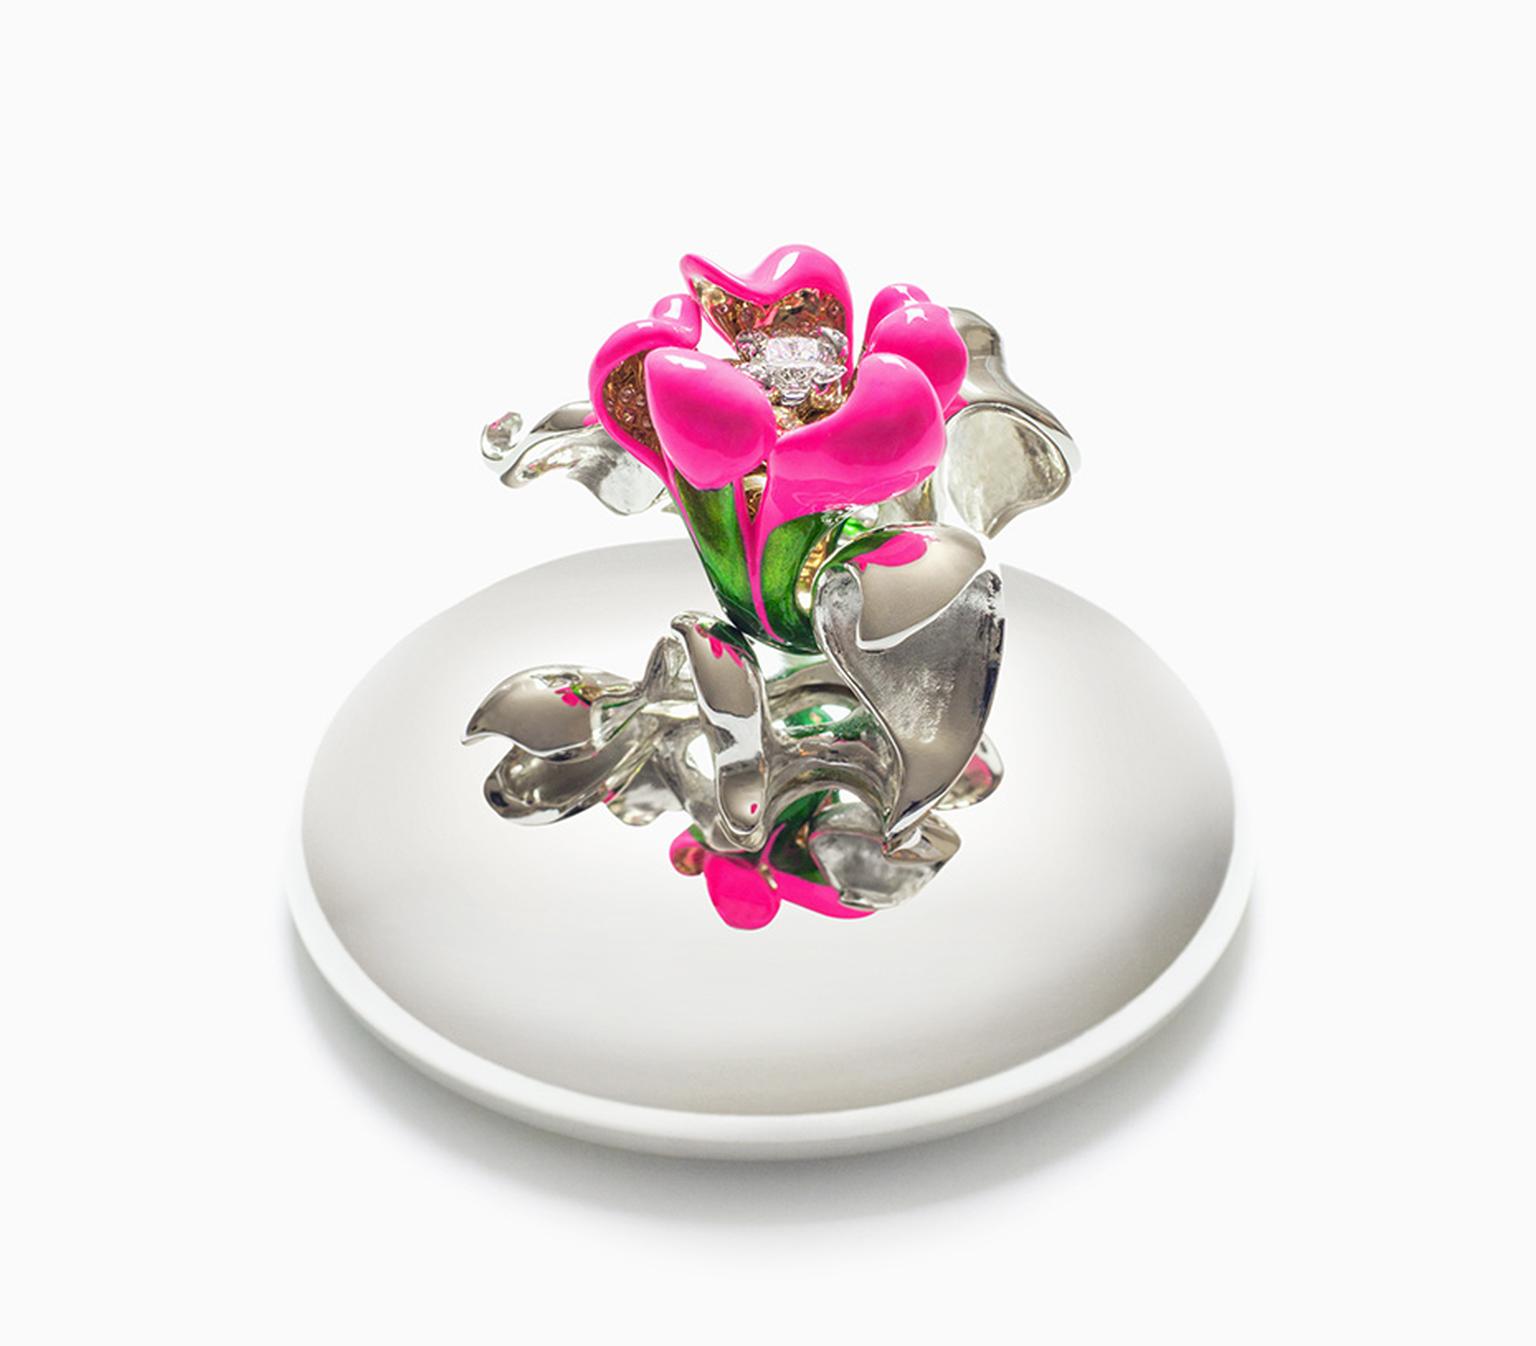 Victoire de Castellane 2013 Crystal Shocking Pink Baby in yellow gold, diamonds and coloured lacquer